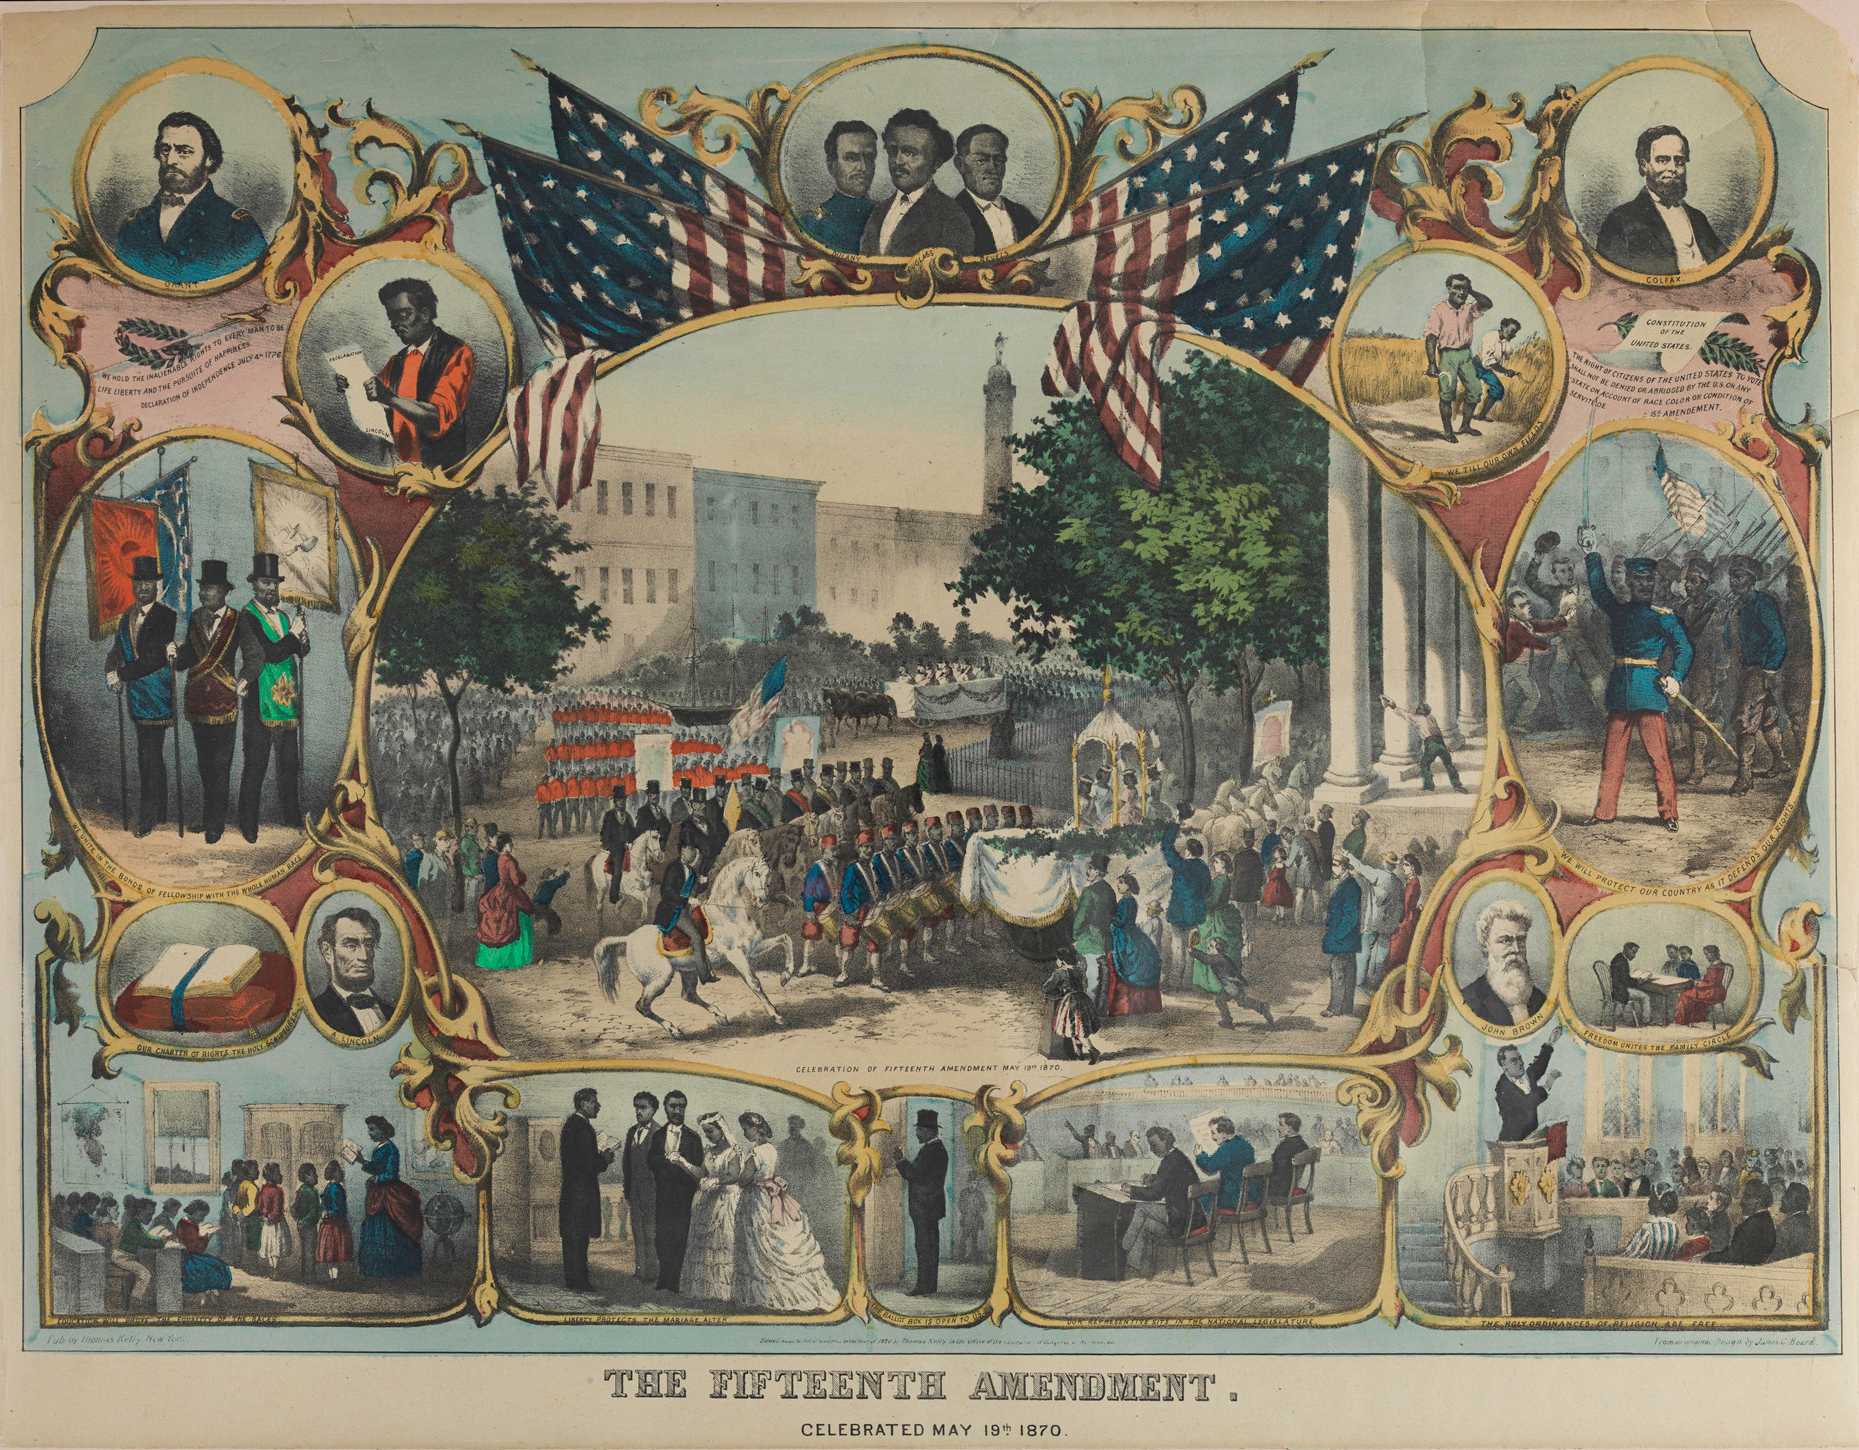 At center, a depiction of a parade in celebration of the passing of the 15th Amendment. Framing it are portraits and vignettes illustrating the rights granted by the 15th Amendment: "We till our own fields," "The Ballot Box is Open to Us," "We Unite in the Bonds of Fellowship with the Whole Human Race," etc.